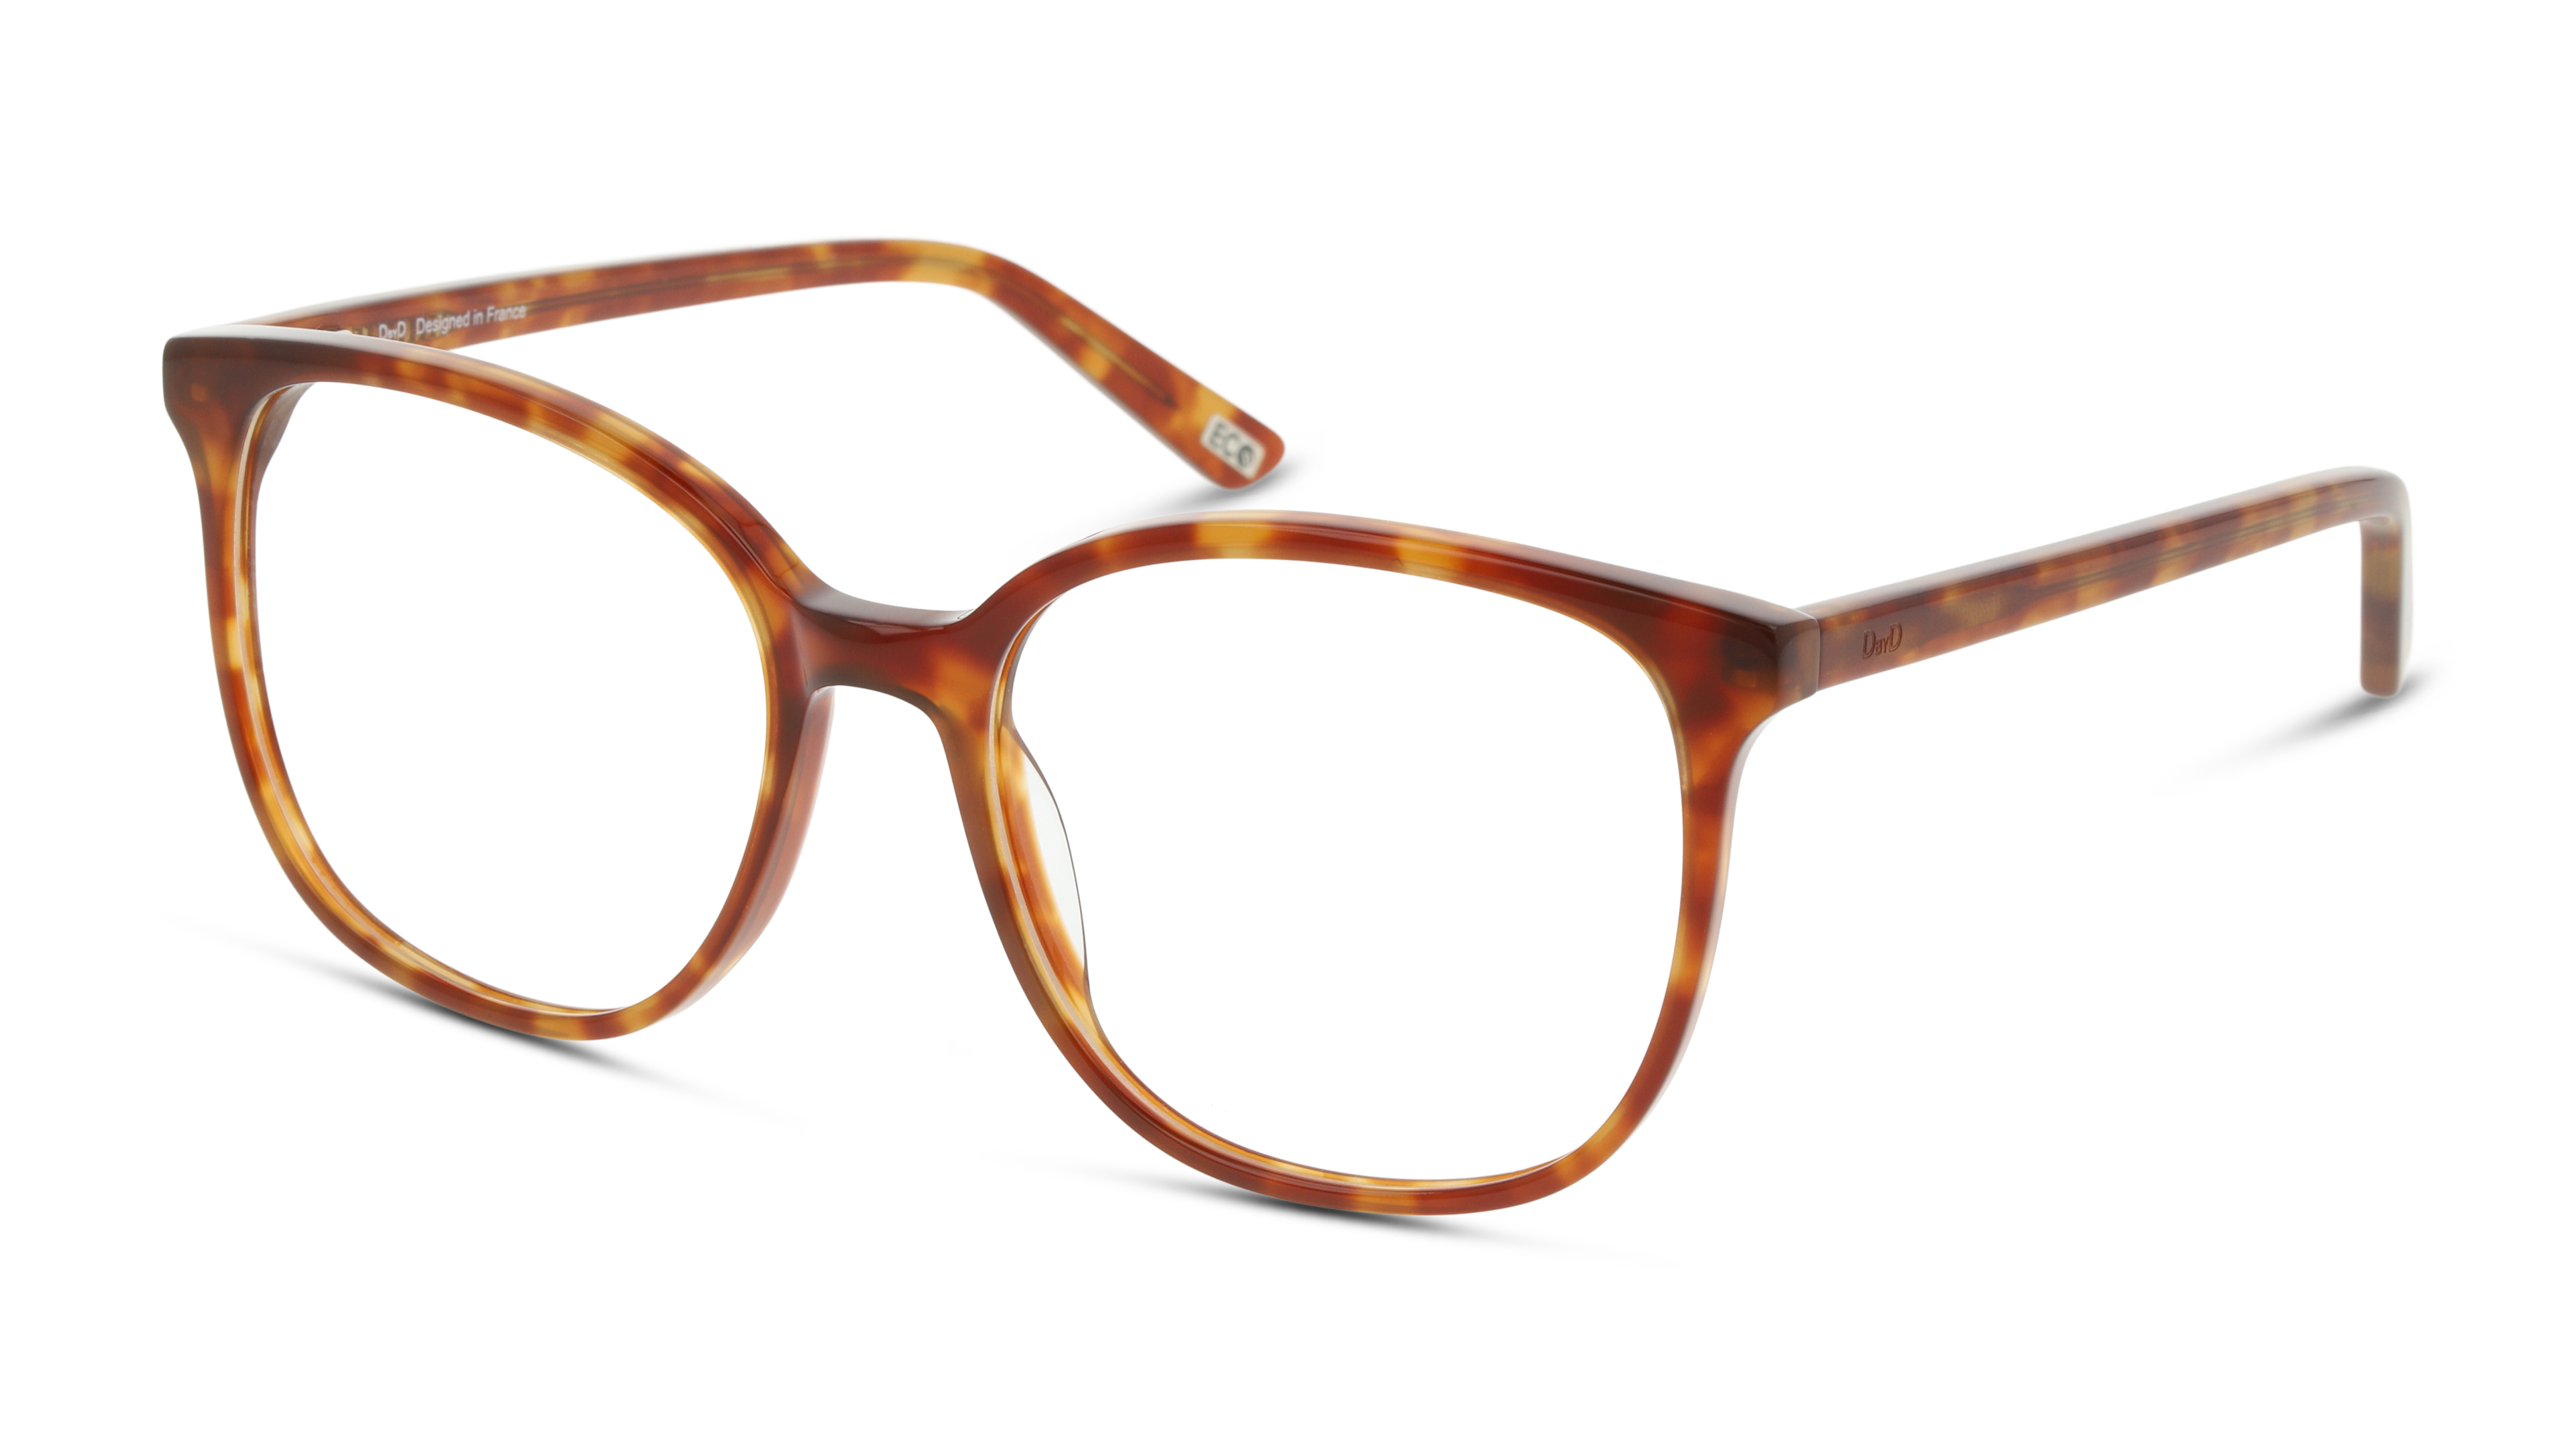 Angle_Left01 DBYD DBOF0042 (HH00) Glasses Transparent / Tortoise Shell